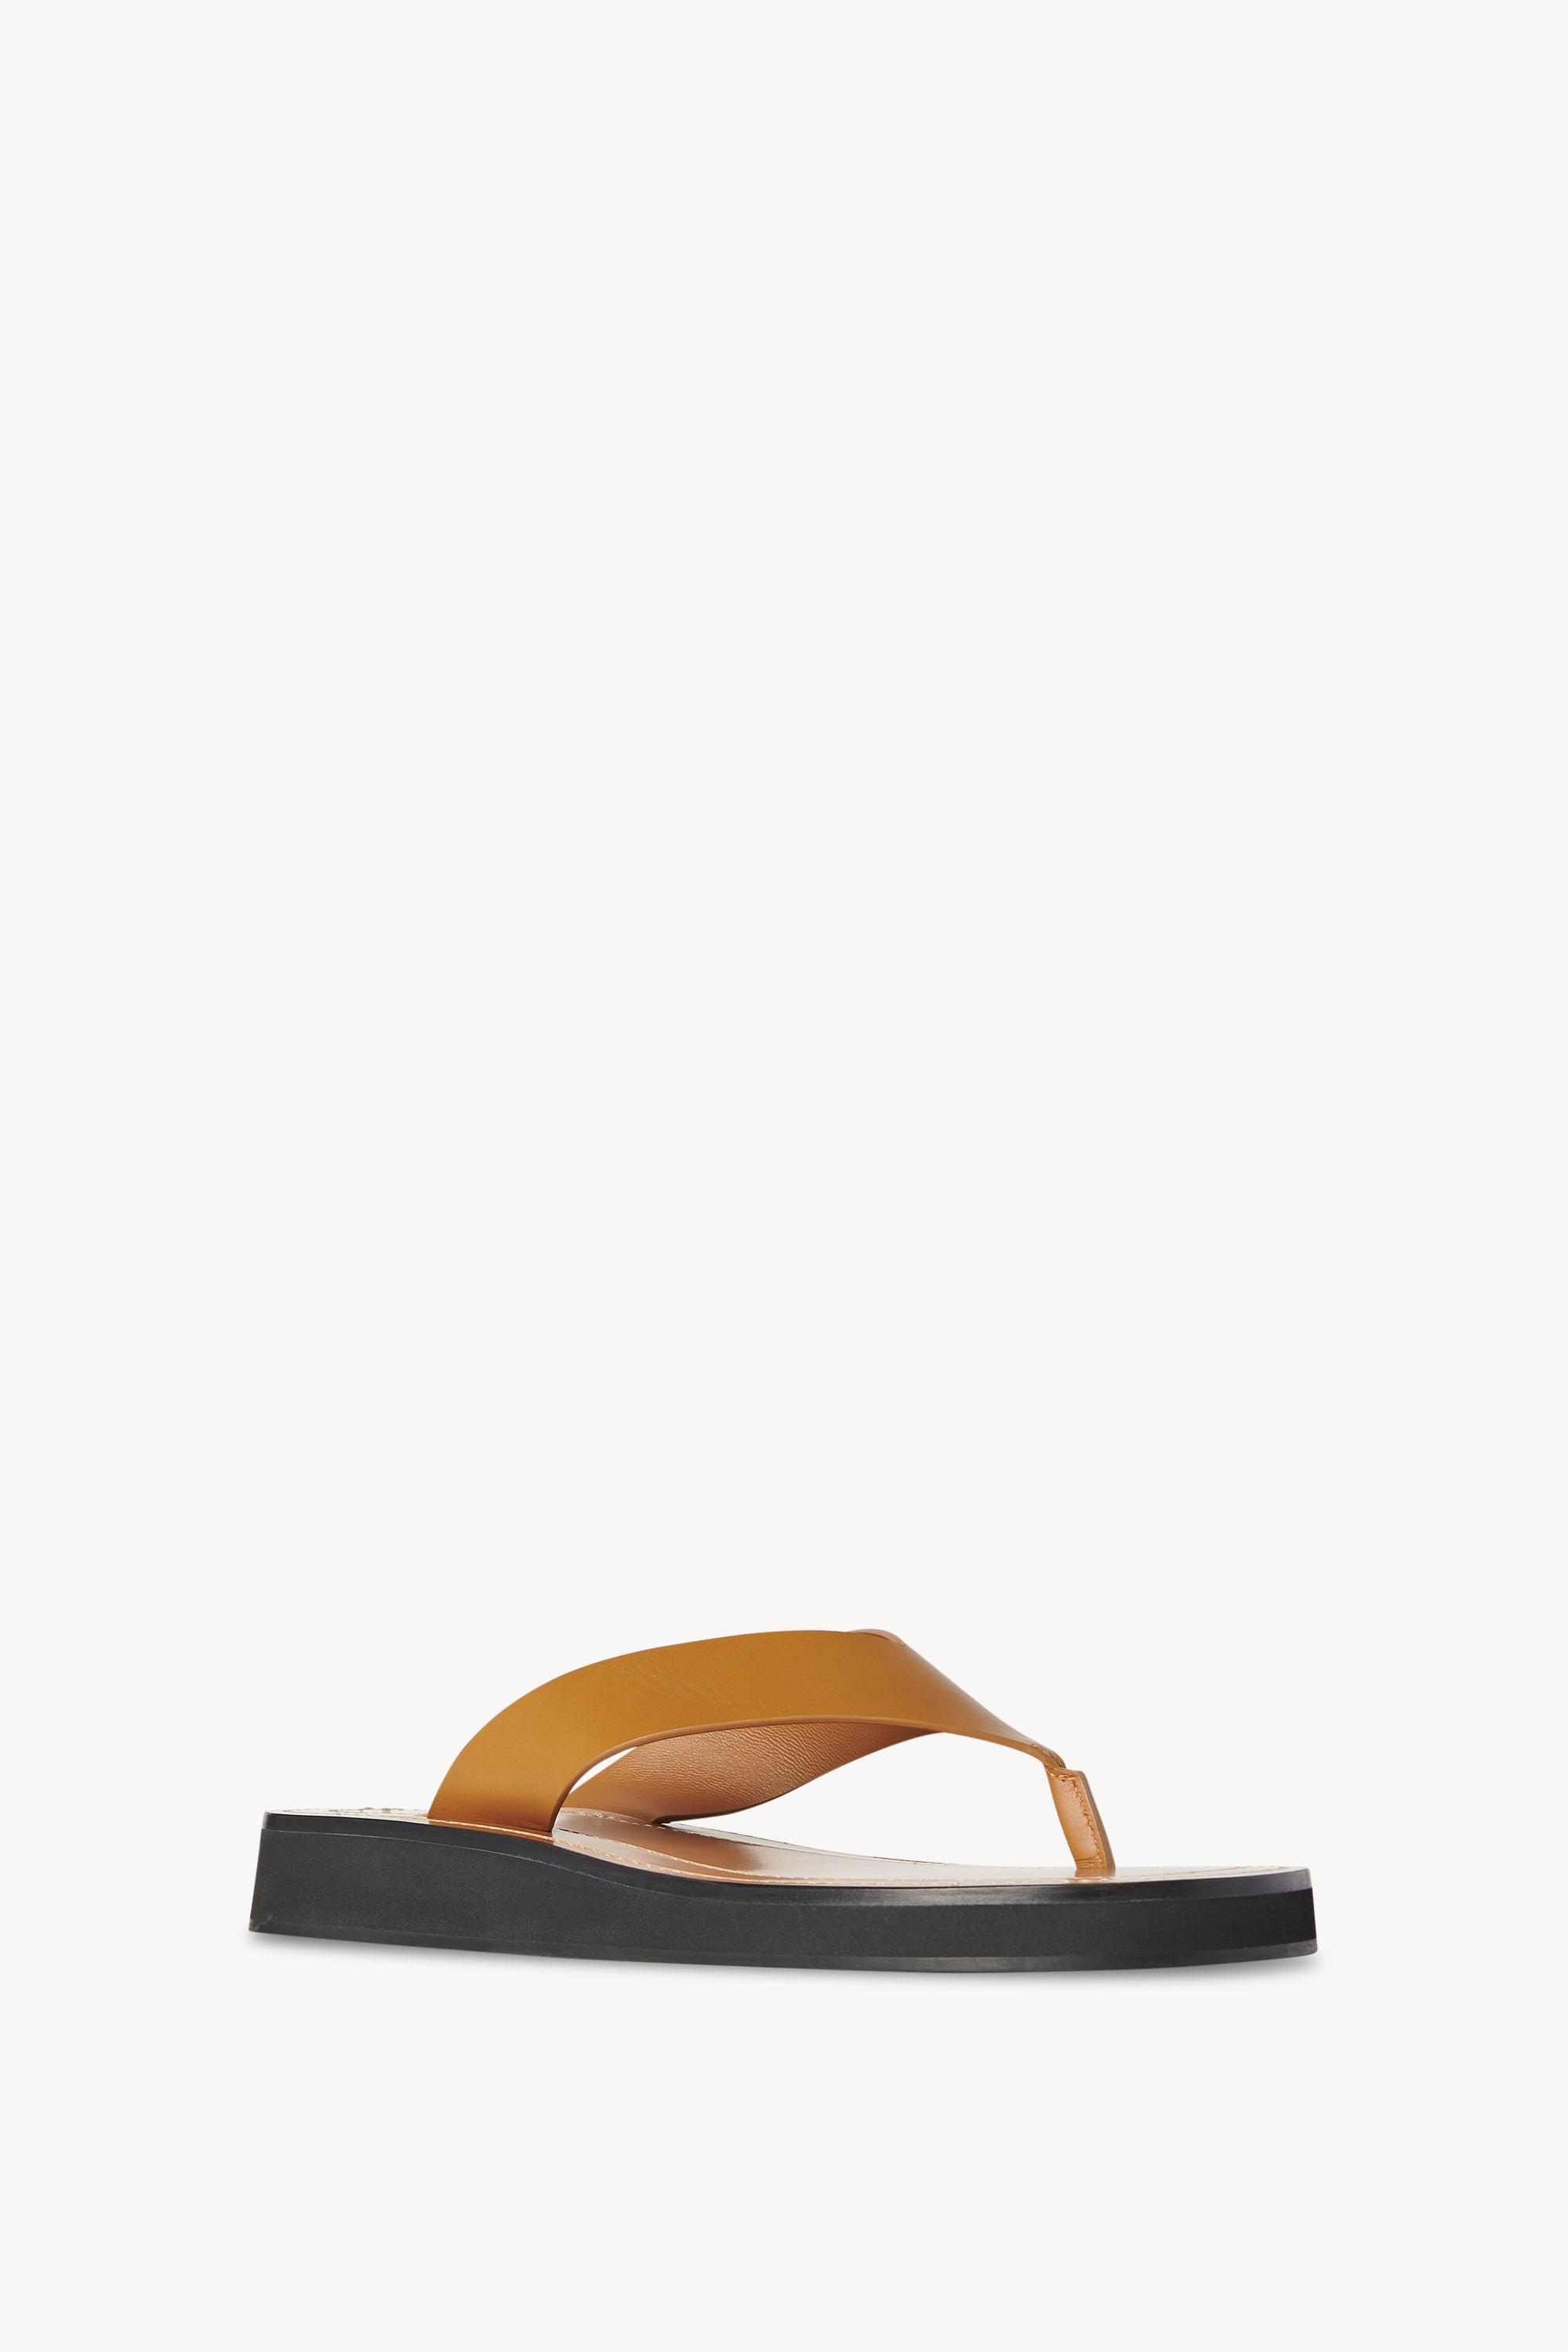 The Row Ginza Sandal in Leather